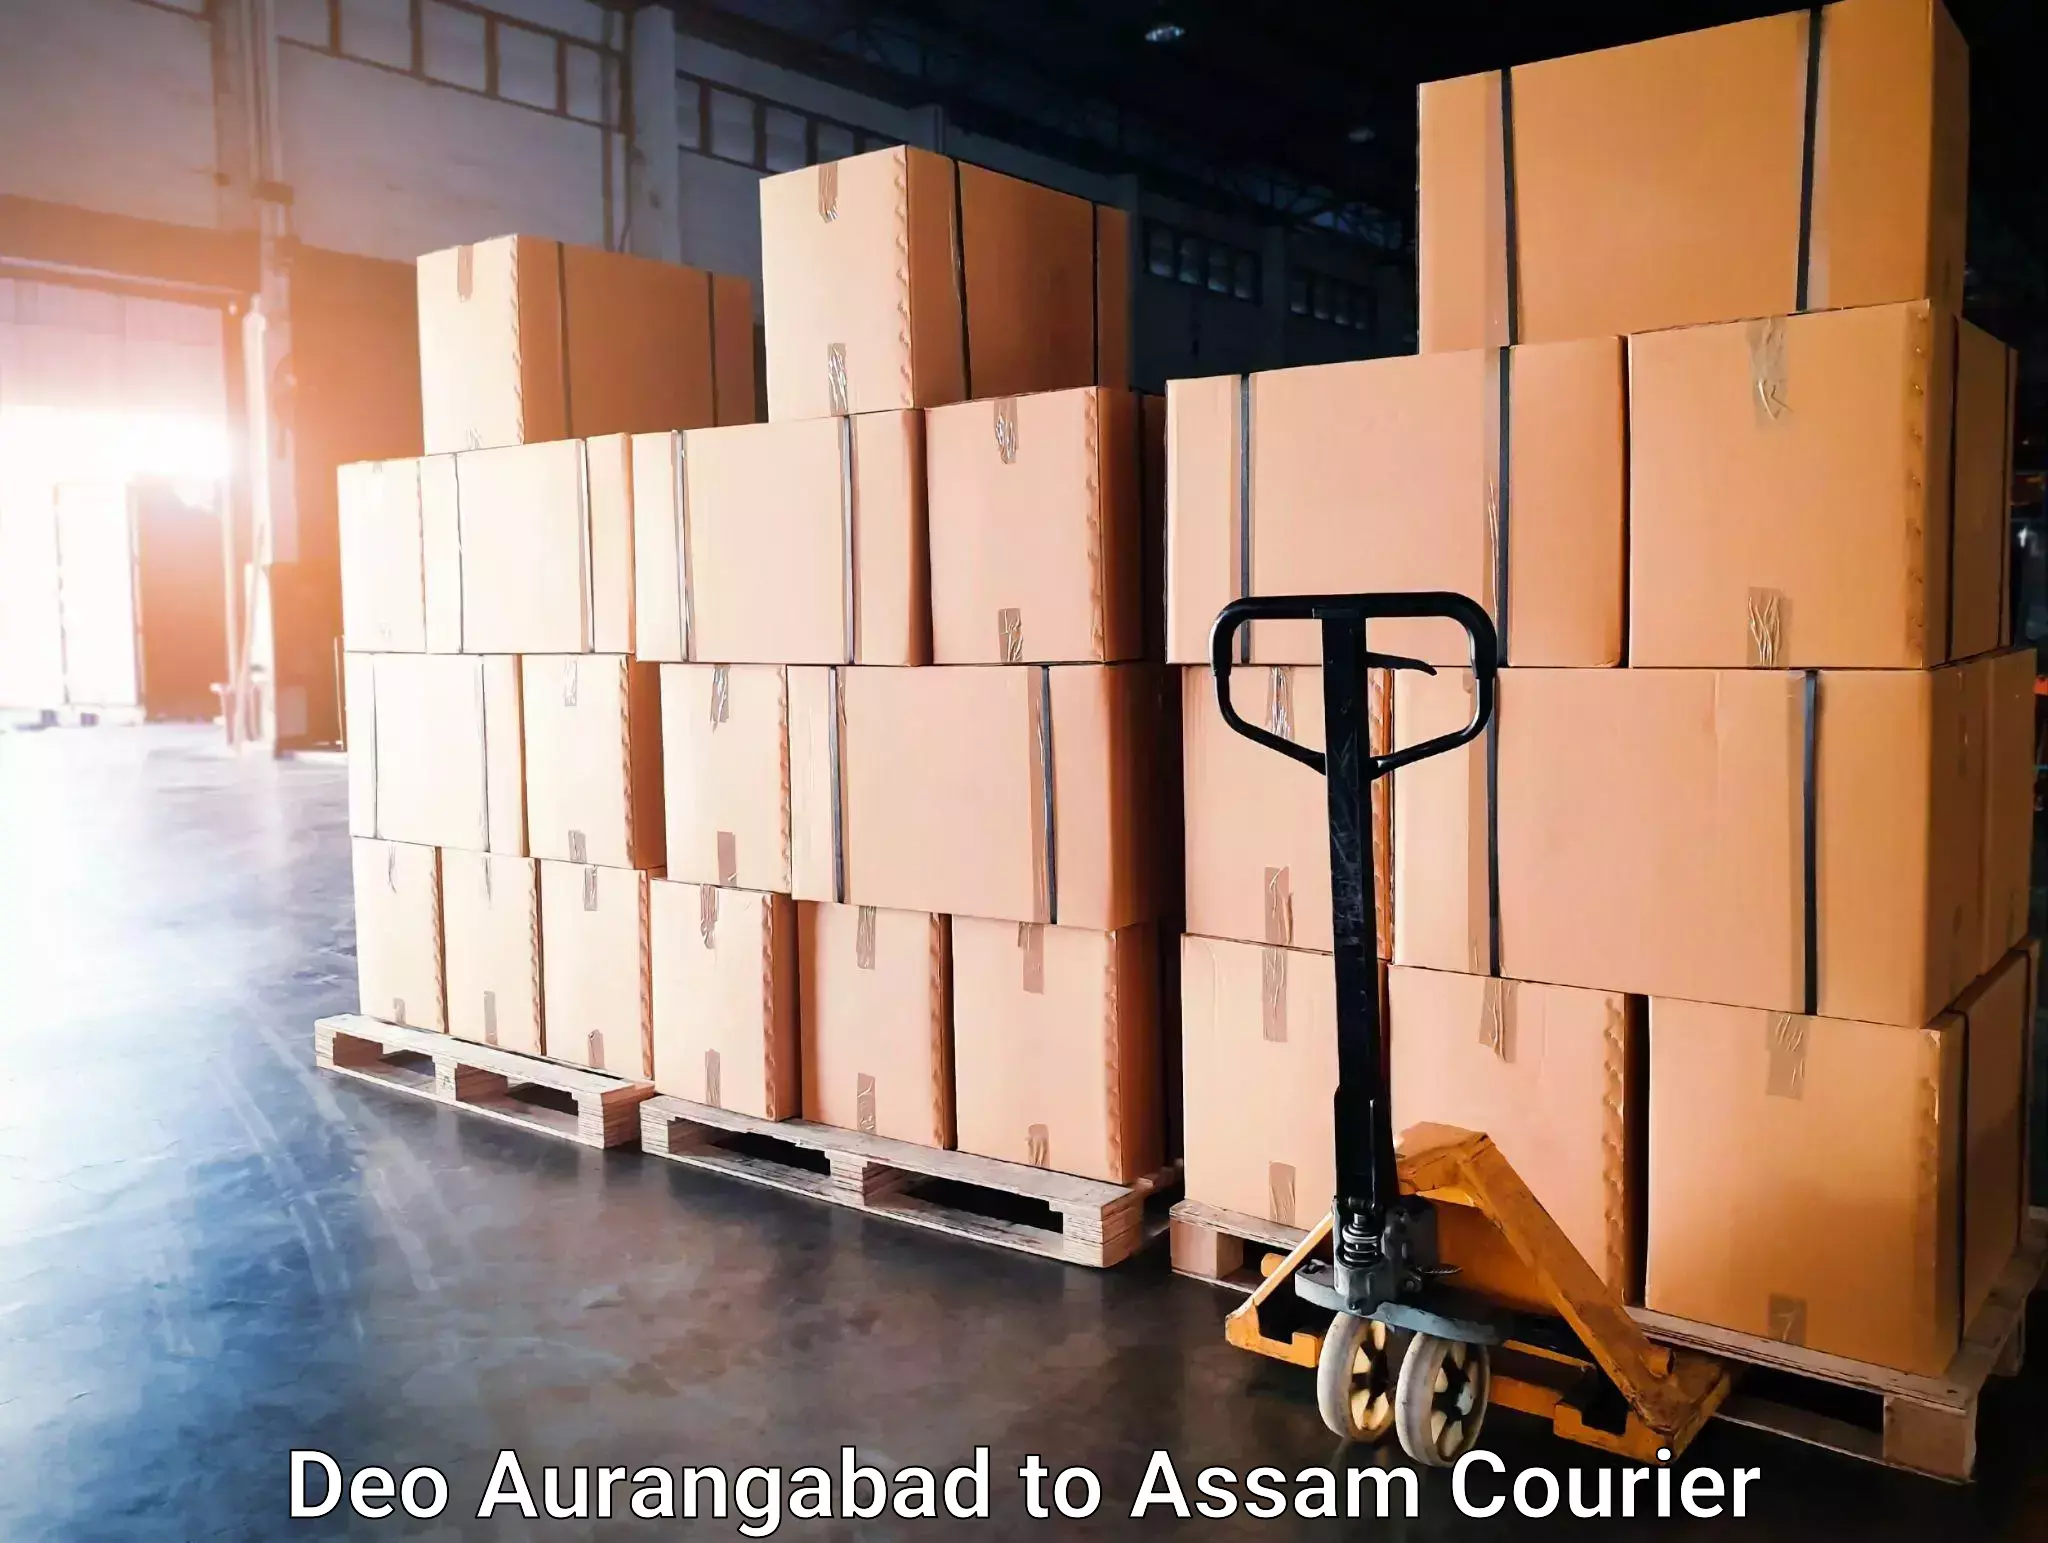 Moving and packing experts Deo Aurangabad to Guwahati University